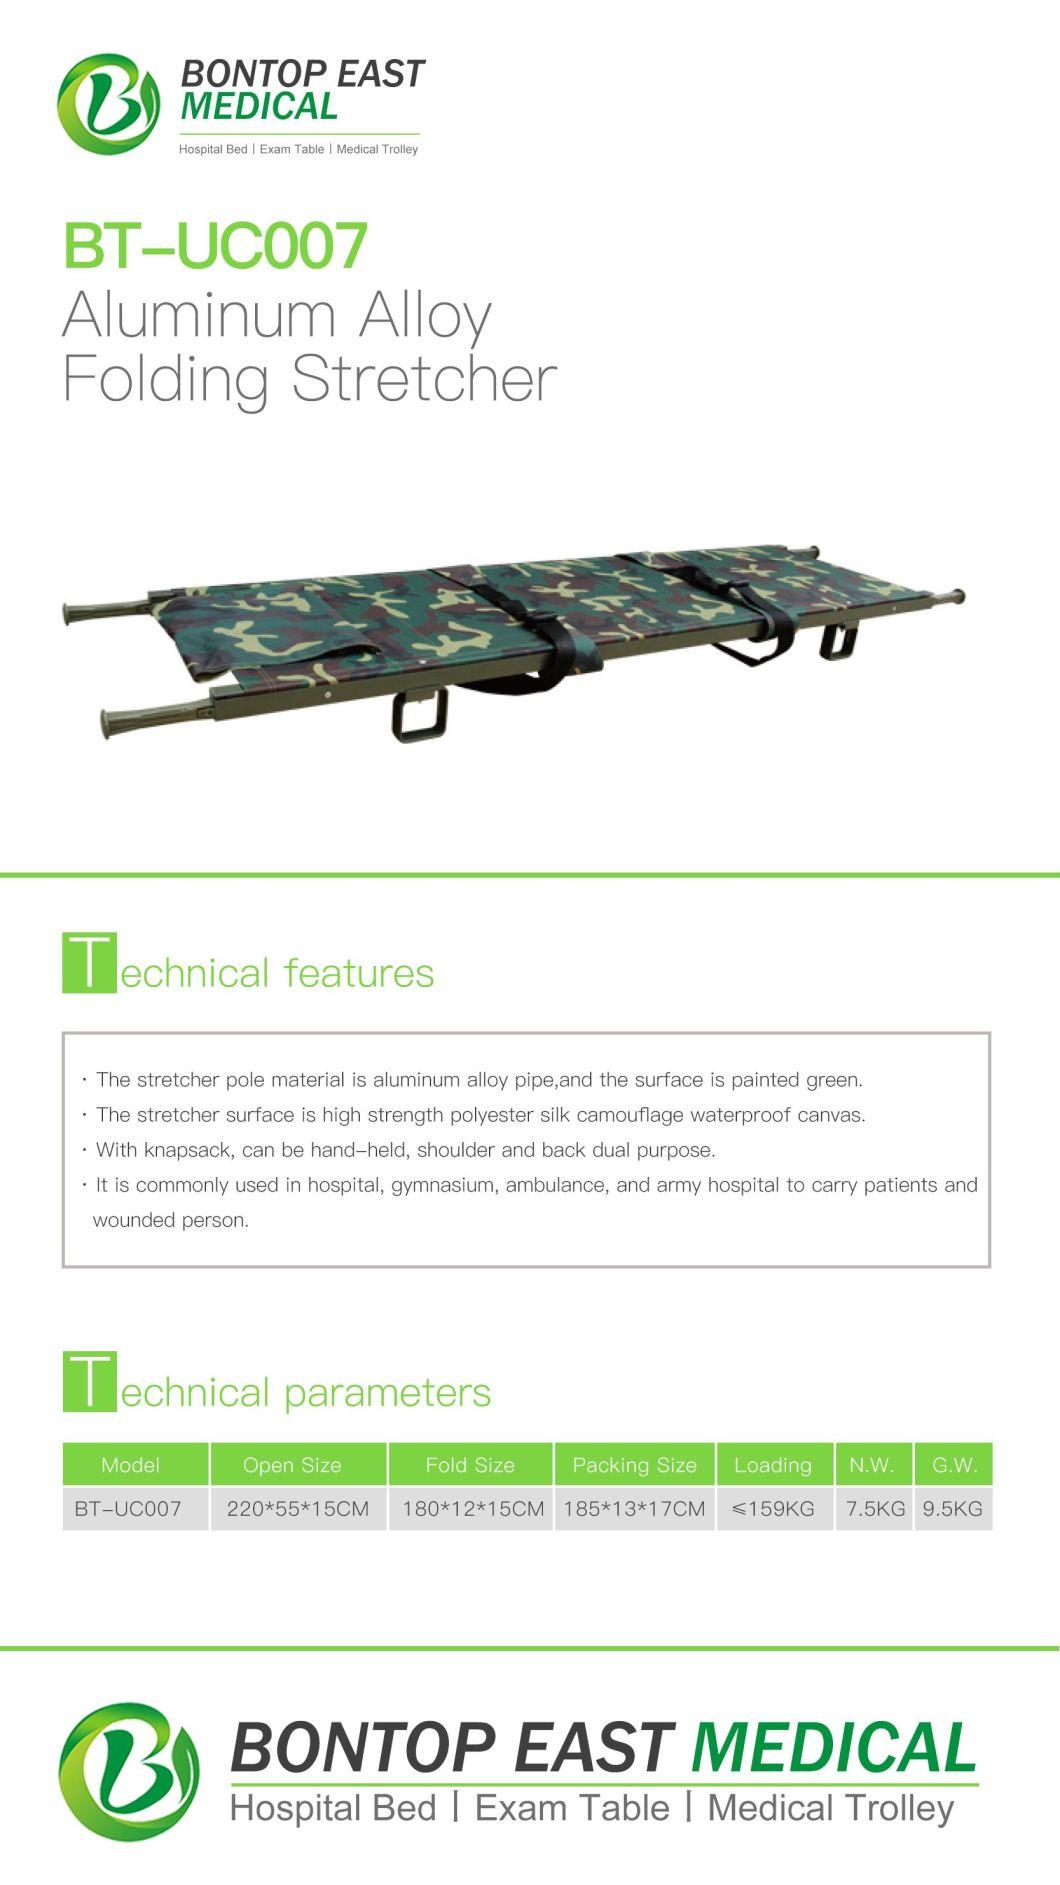 High Quality Double Folding Hospital Medical Aluminum Alloy Stretcher Emergency First Aid Stretcher